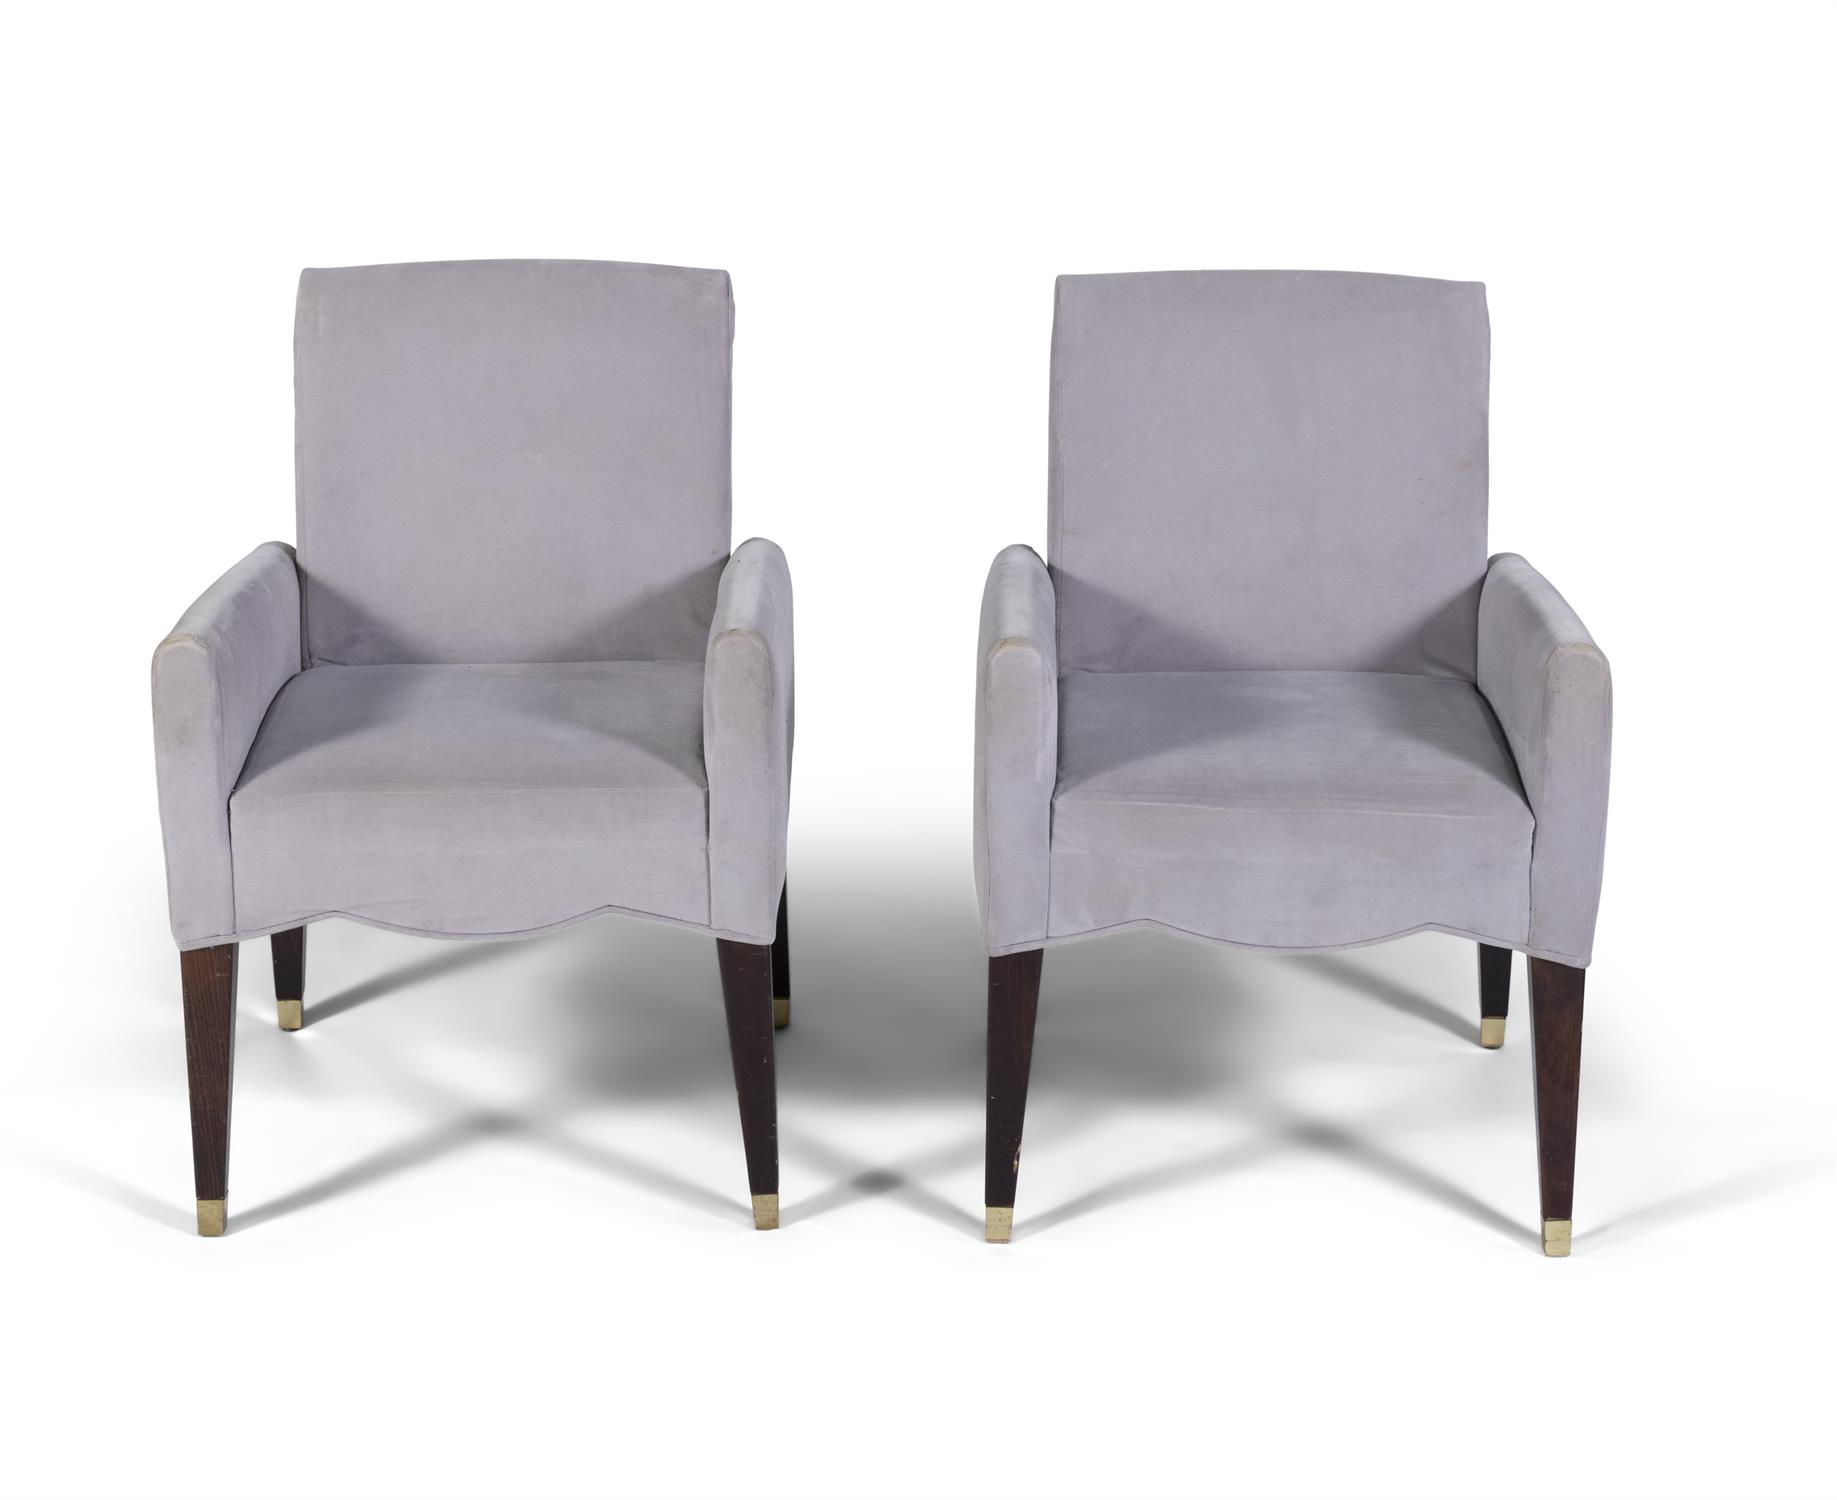 OLIVIER GAGNIERE A pair of 'Cafe Marly' chairs by Olivier Gagniere. Paris, c.1980. - Image 2 of 3